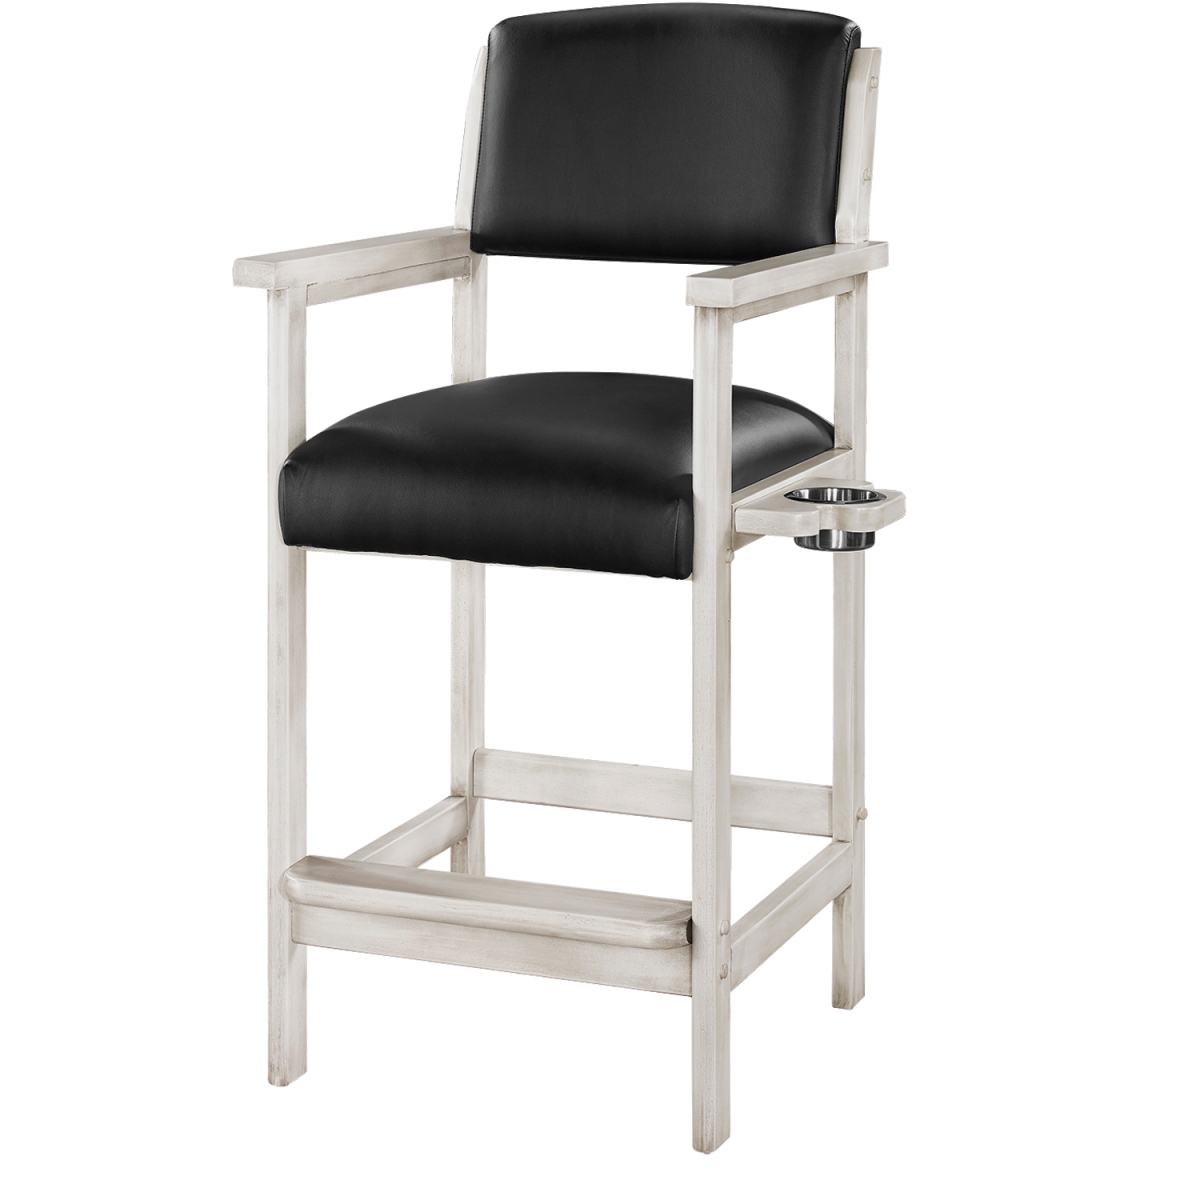 Picture of RAM Game Room SPEC AW 20 x 20 x 45 in. Spectator Chair with Drink Holder, Antique White